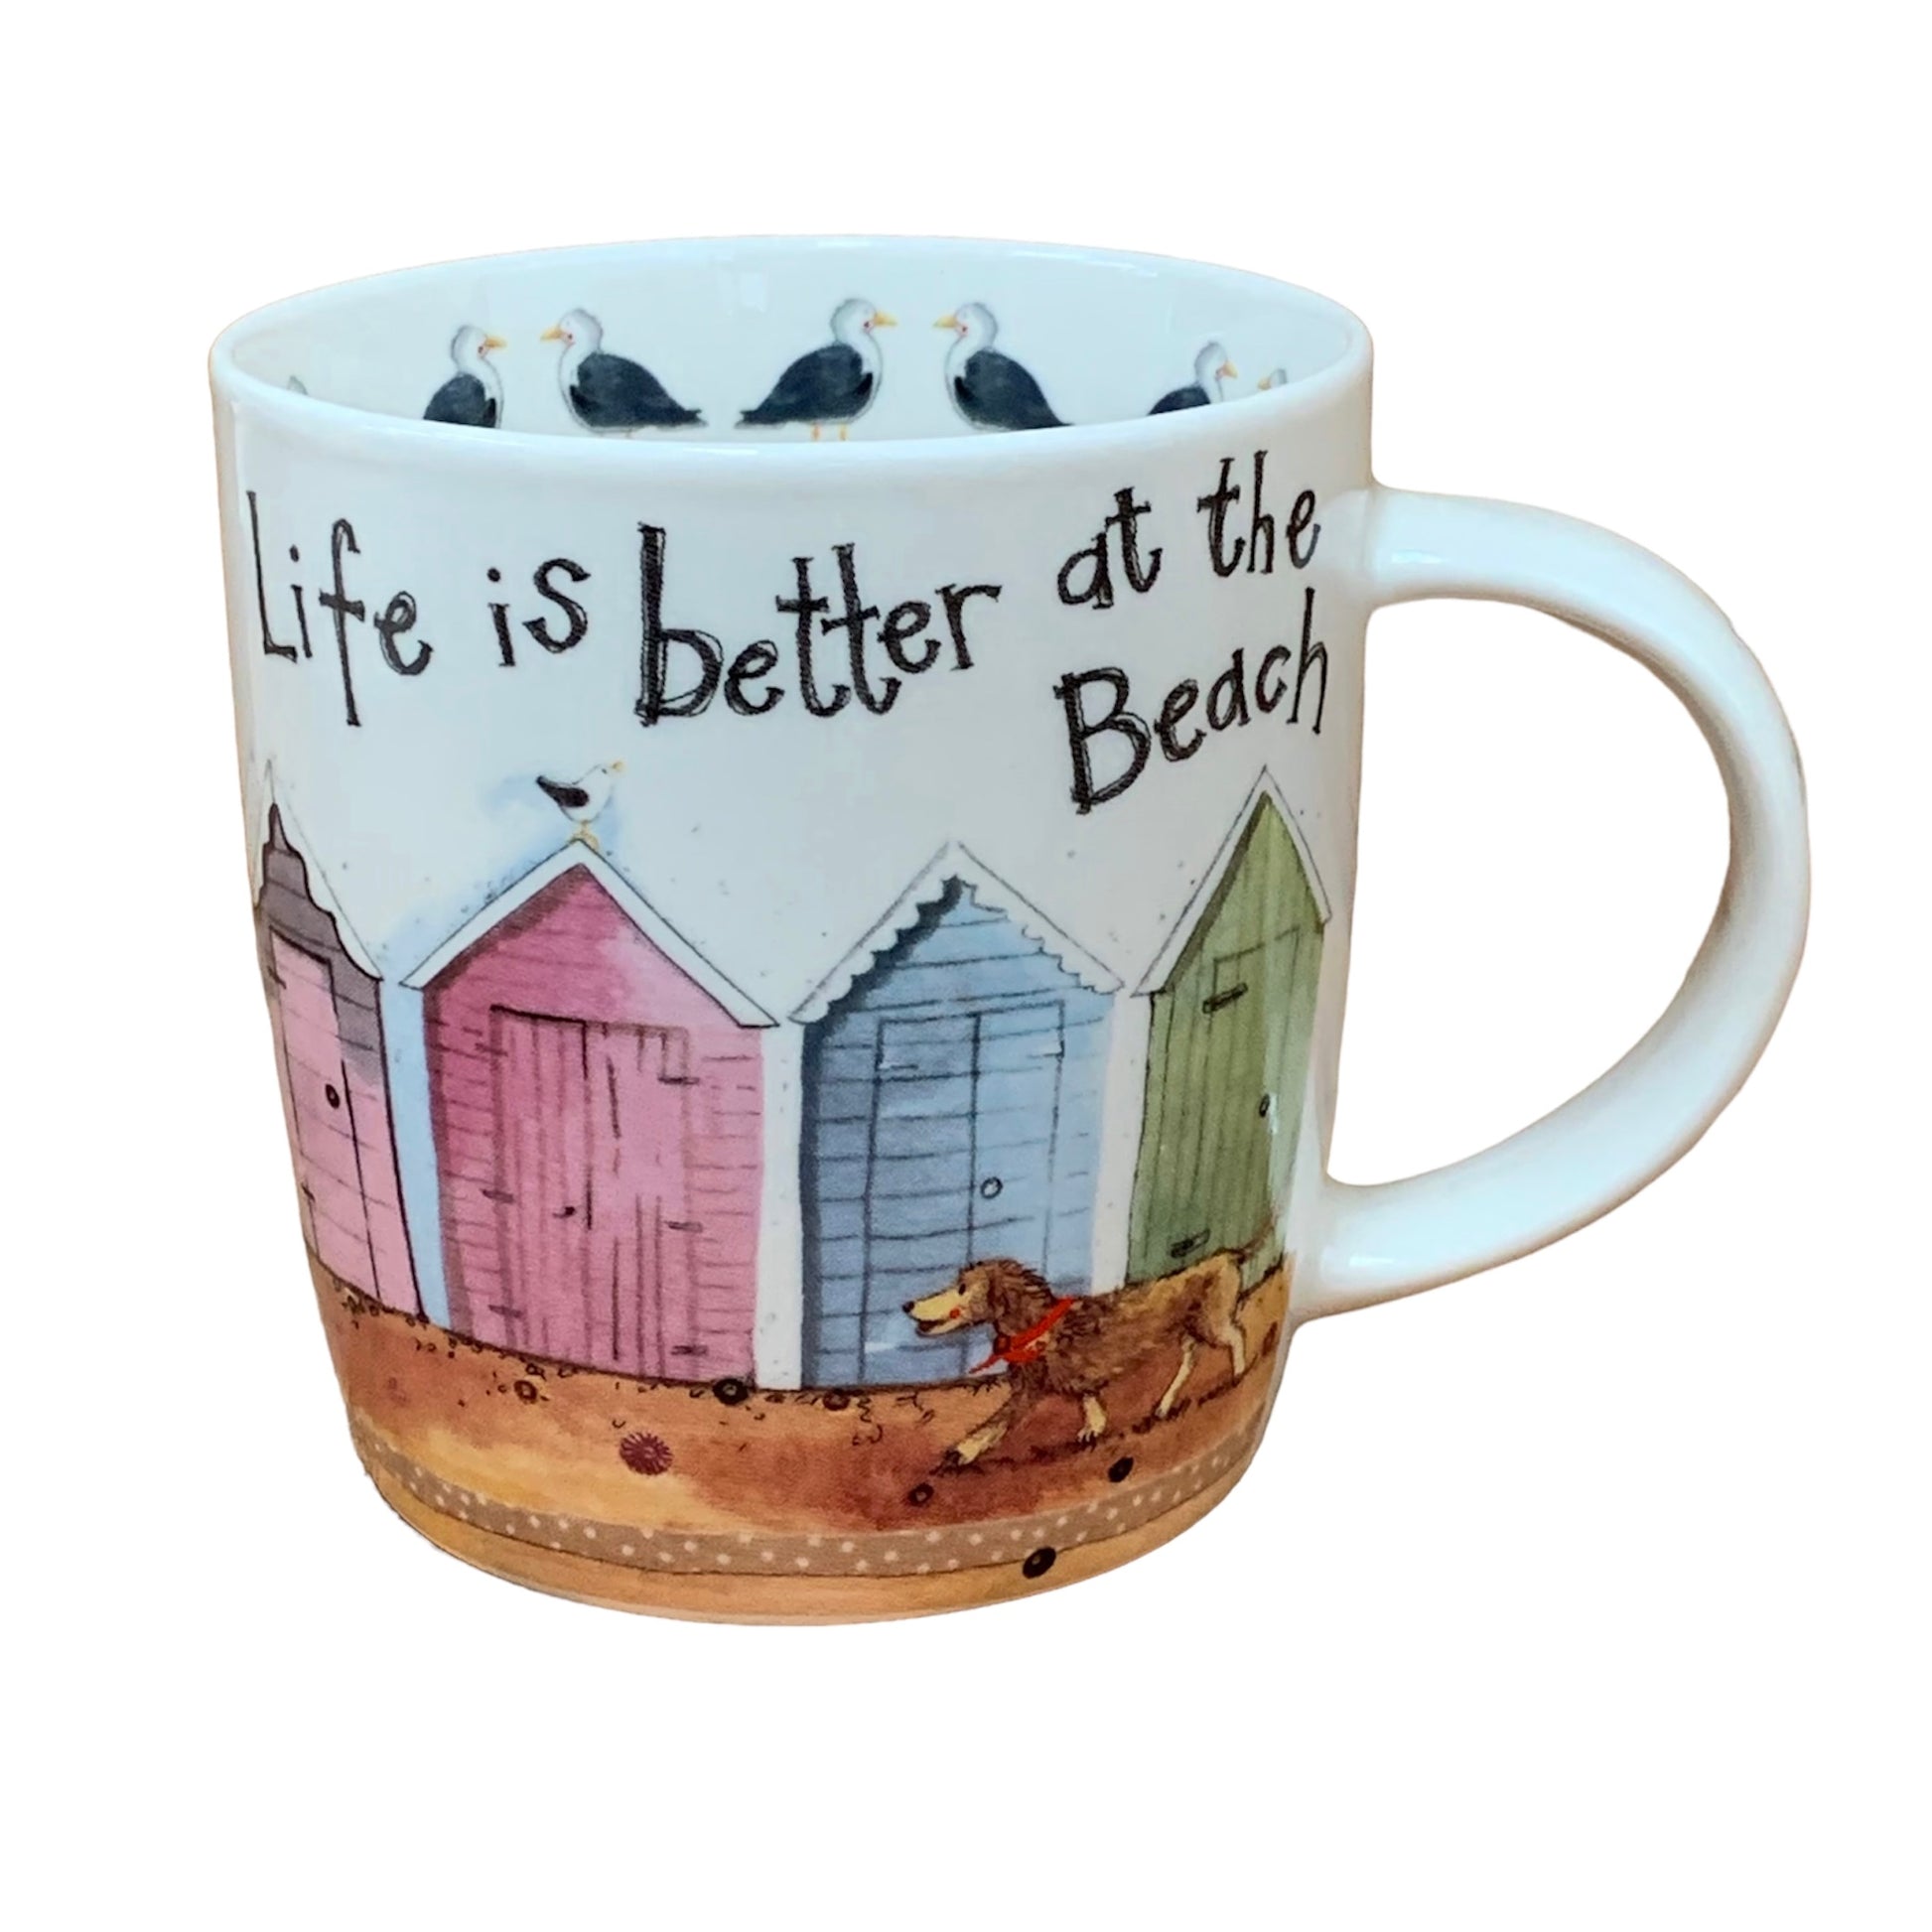 Alex Clark mug is illustrated with an adorable dog walking past brightly coloured beach huts.